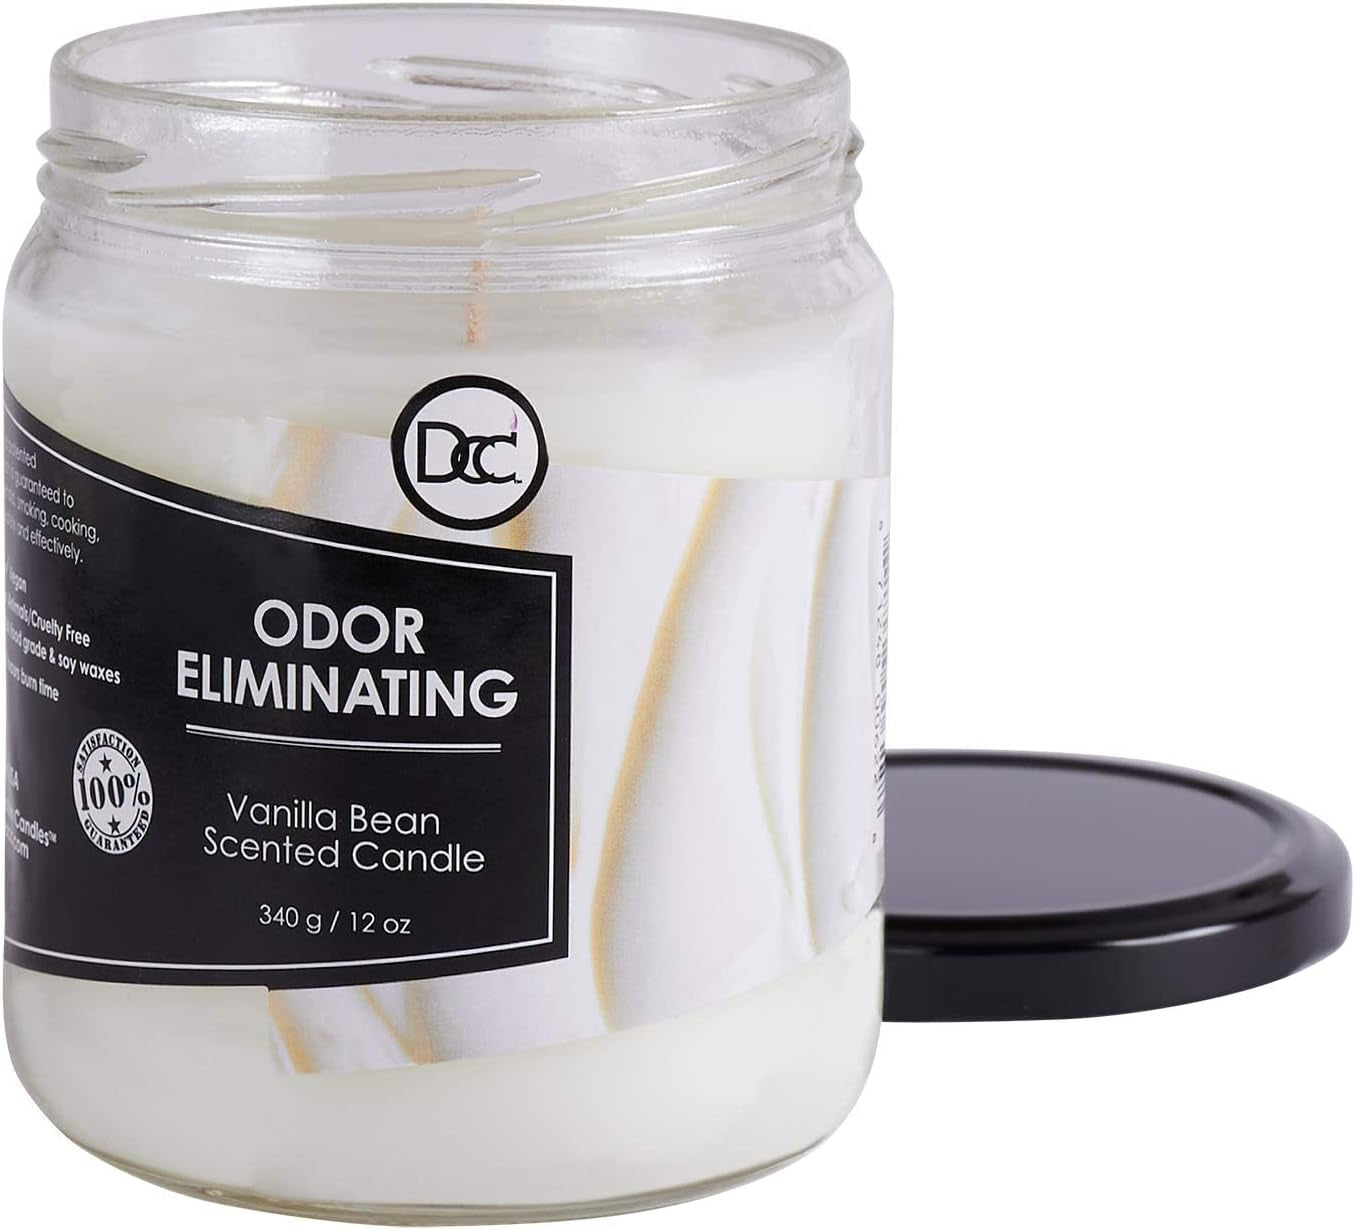 Vanilla Bean Odor Eliminating Highly Fragranced Candle - Eliminates 95% of Pet, Smoke, Food, and Other Smells Quickly - up to 80 Hour Burn Time - 12 Ounce Premium Soy Blend